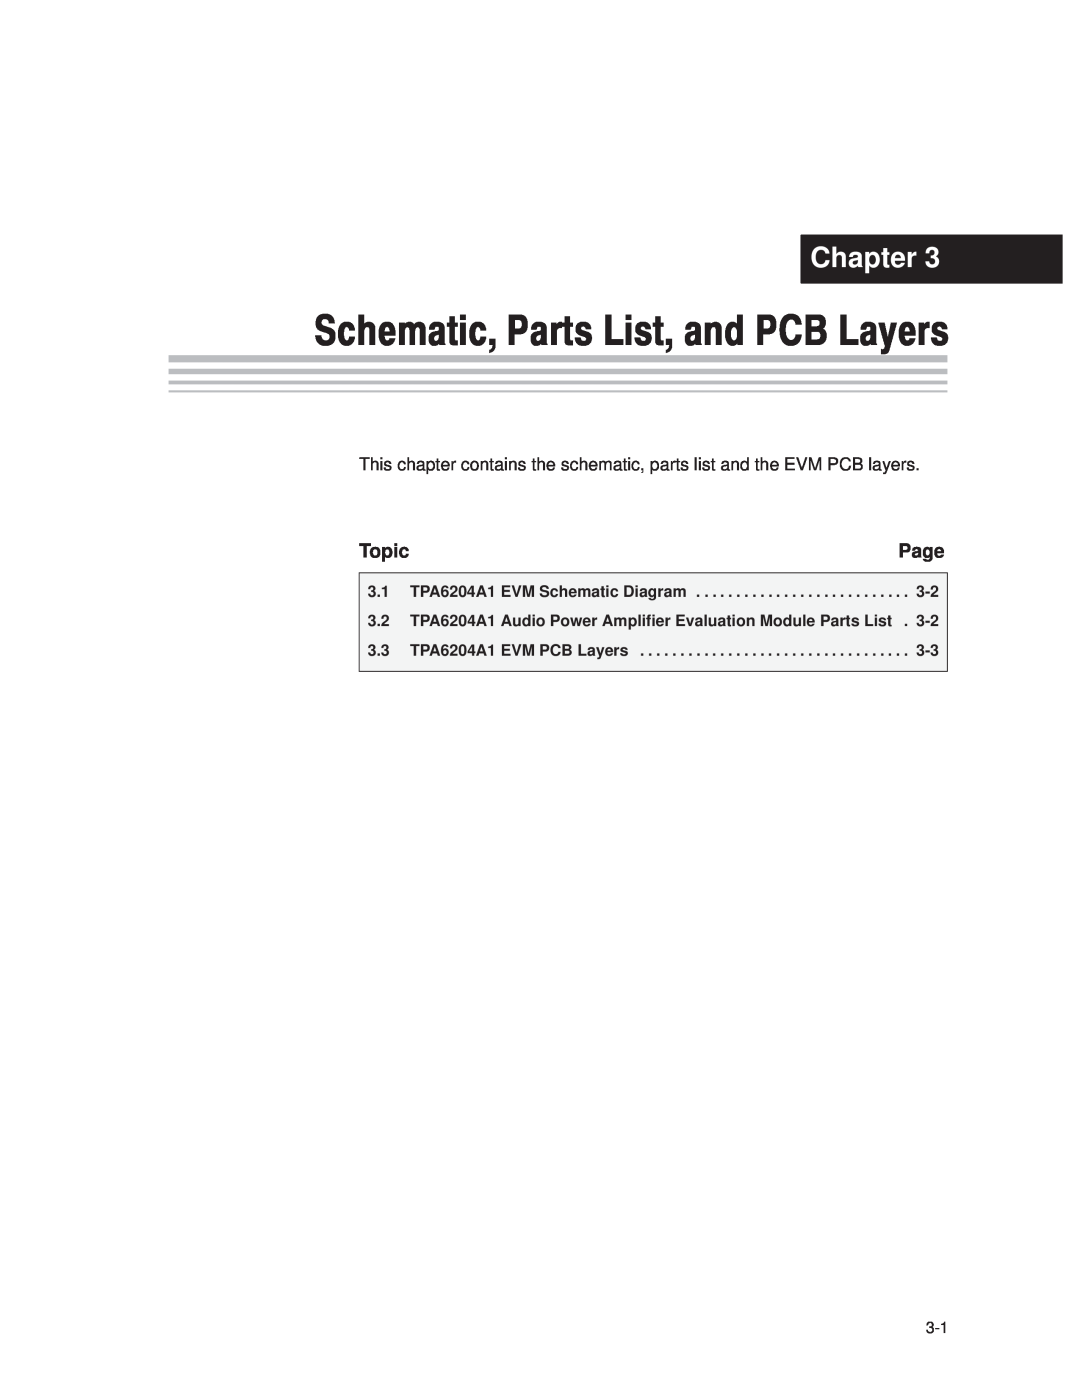 Texas Instruments manual Schematic, Parts List, and PCB Layers, Chapter, Page, Topic, TPA6204A1 EVM Schematic Diagram 